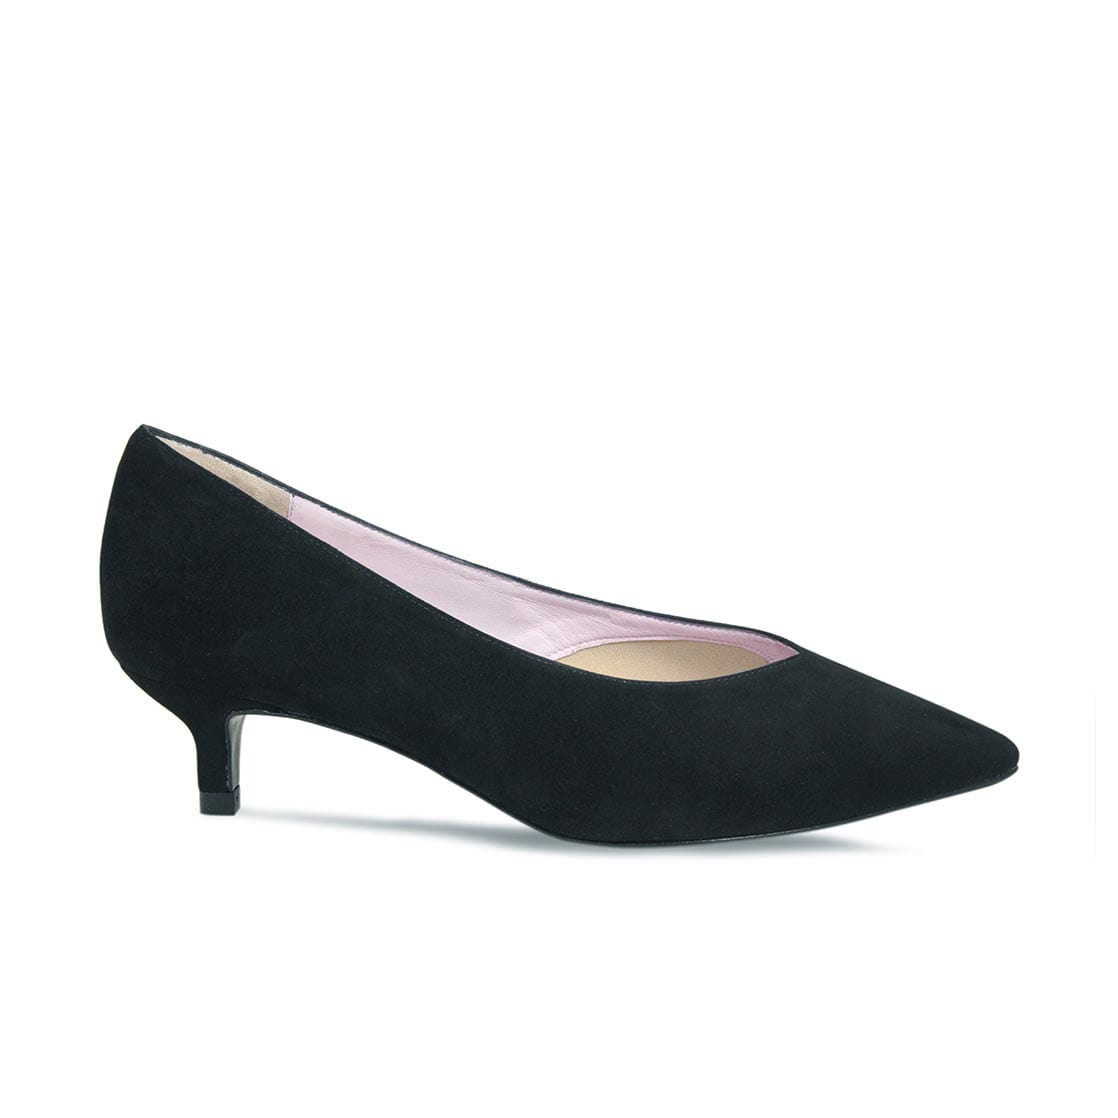 Kitty: Black Suede – Wide Fit Low Heels for Bunions